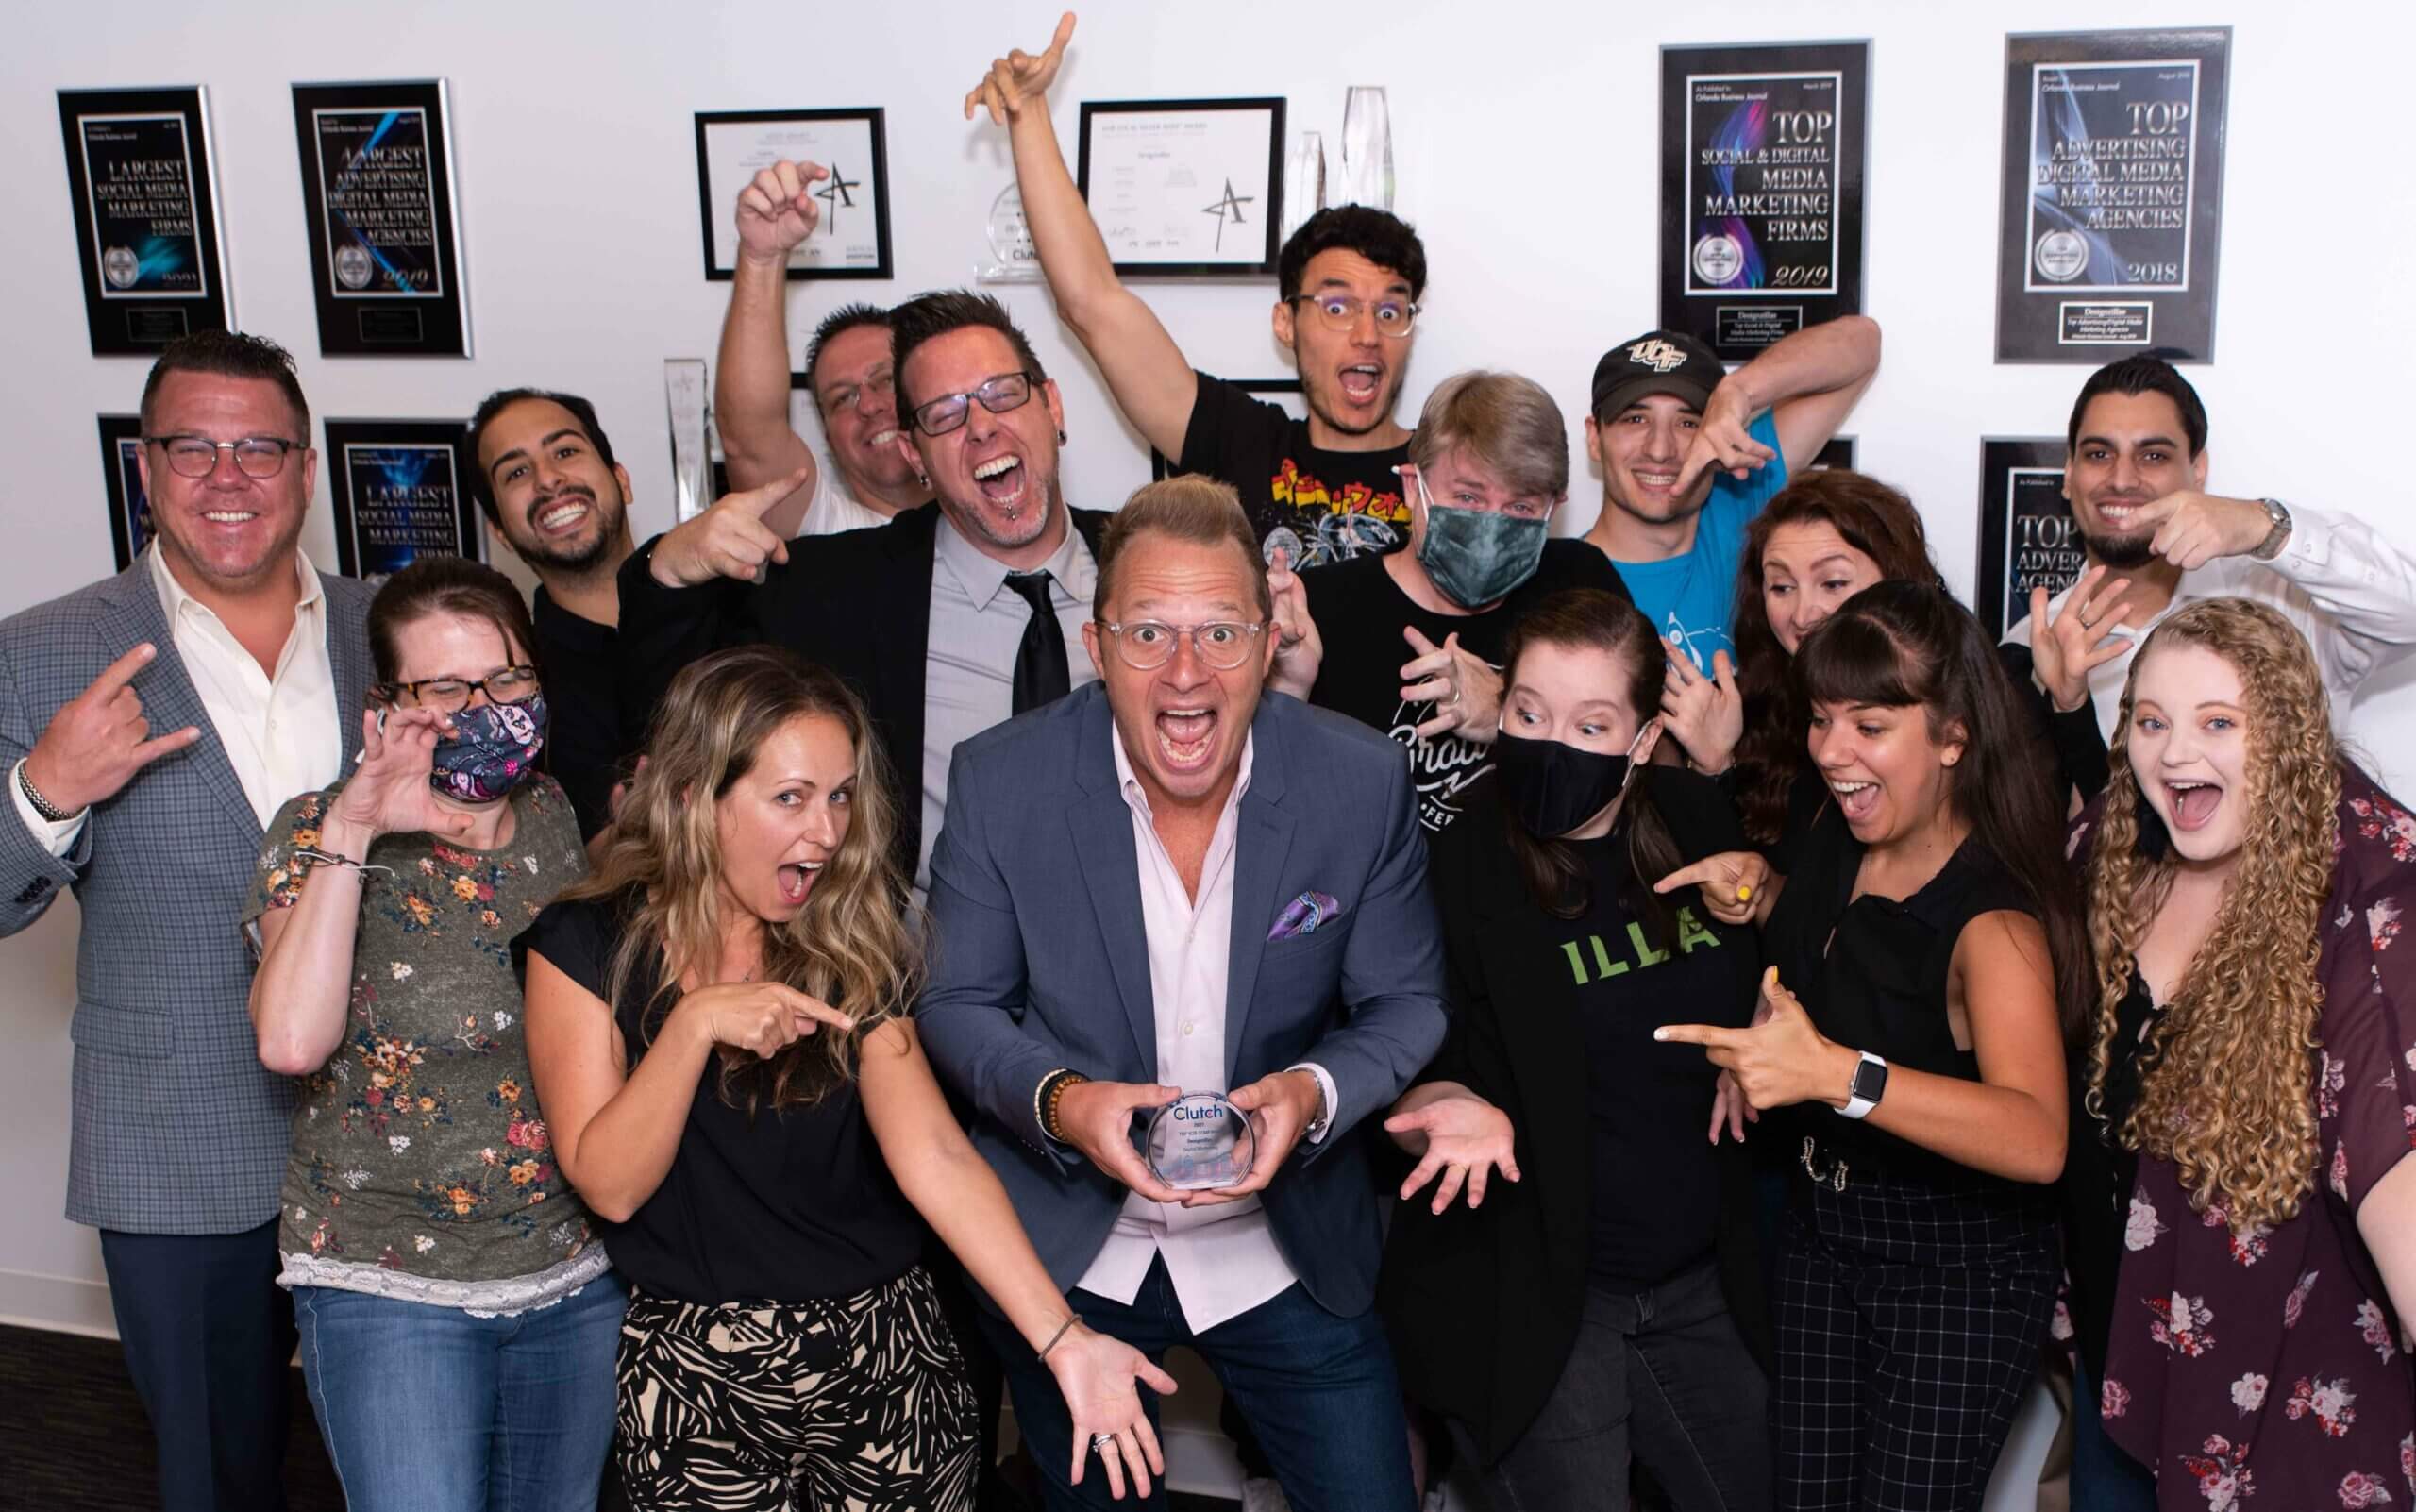 Designzillas Group Shot With Clutch Trophy for Top Advertising & Marketing Agency